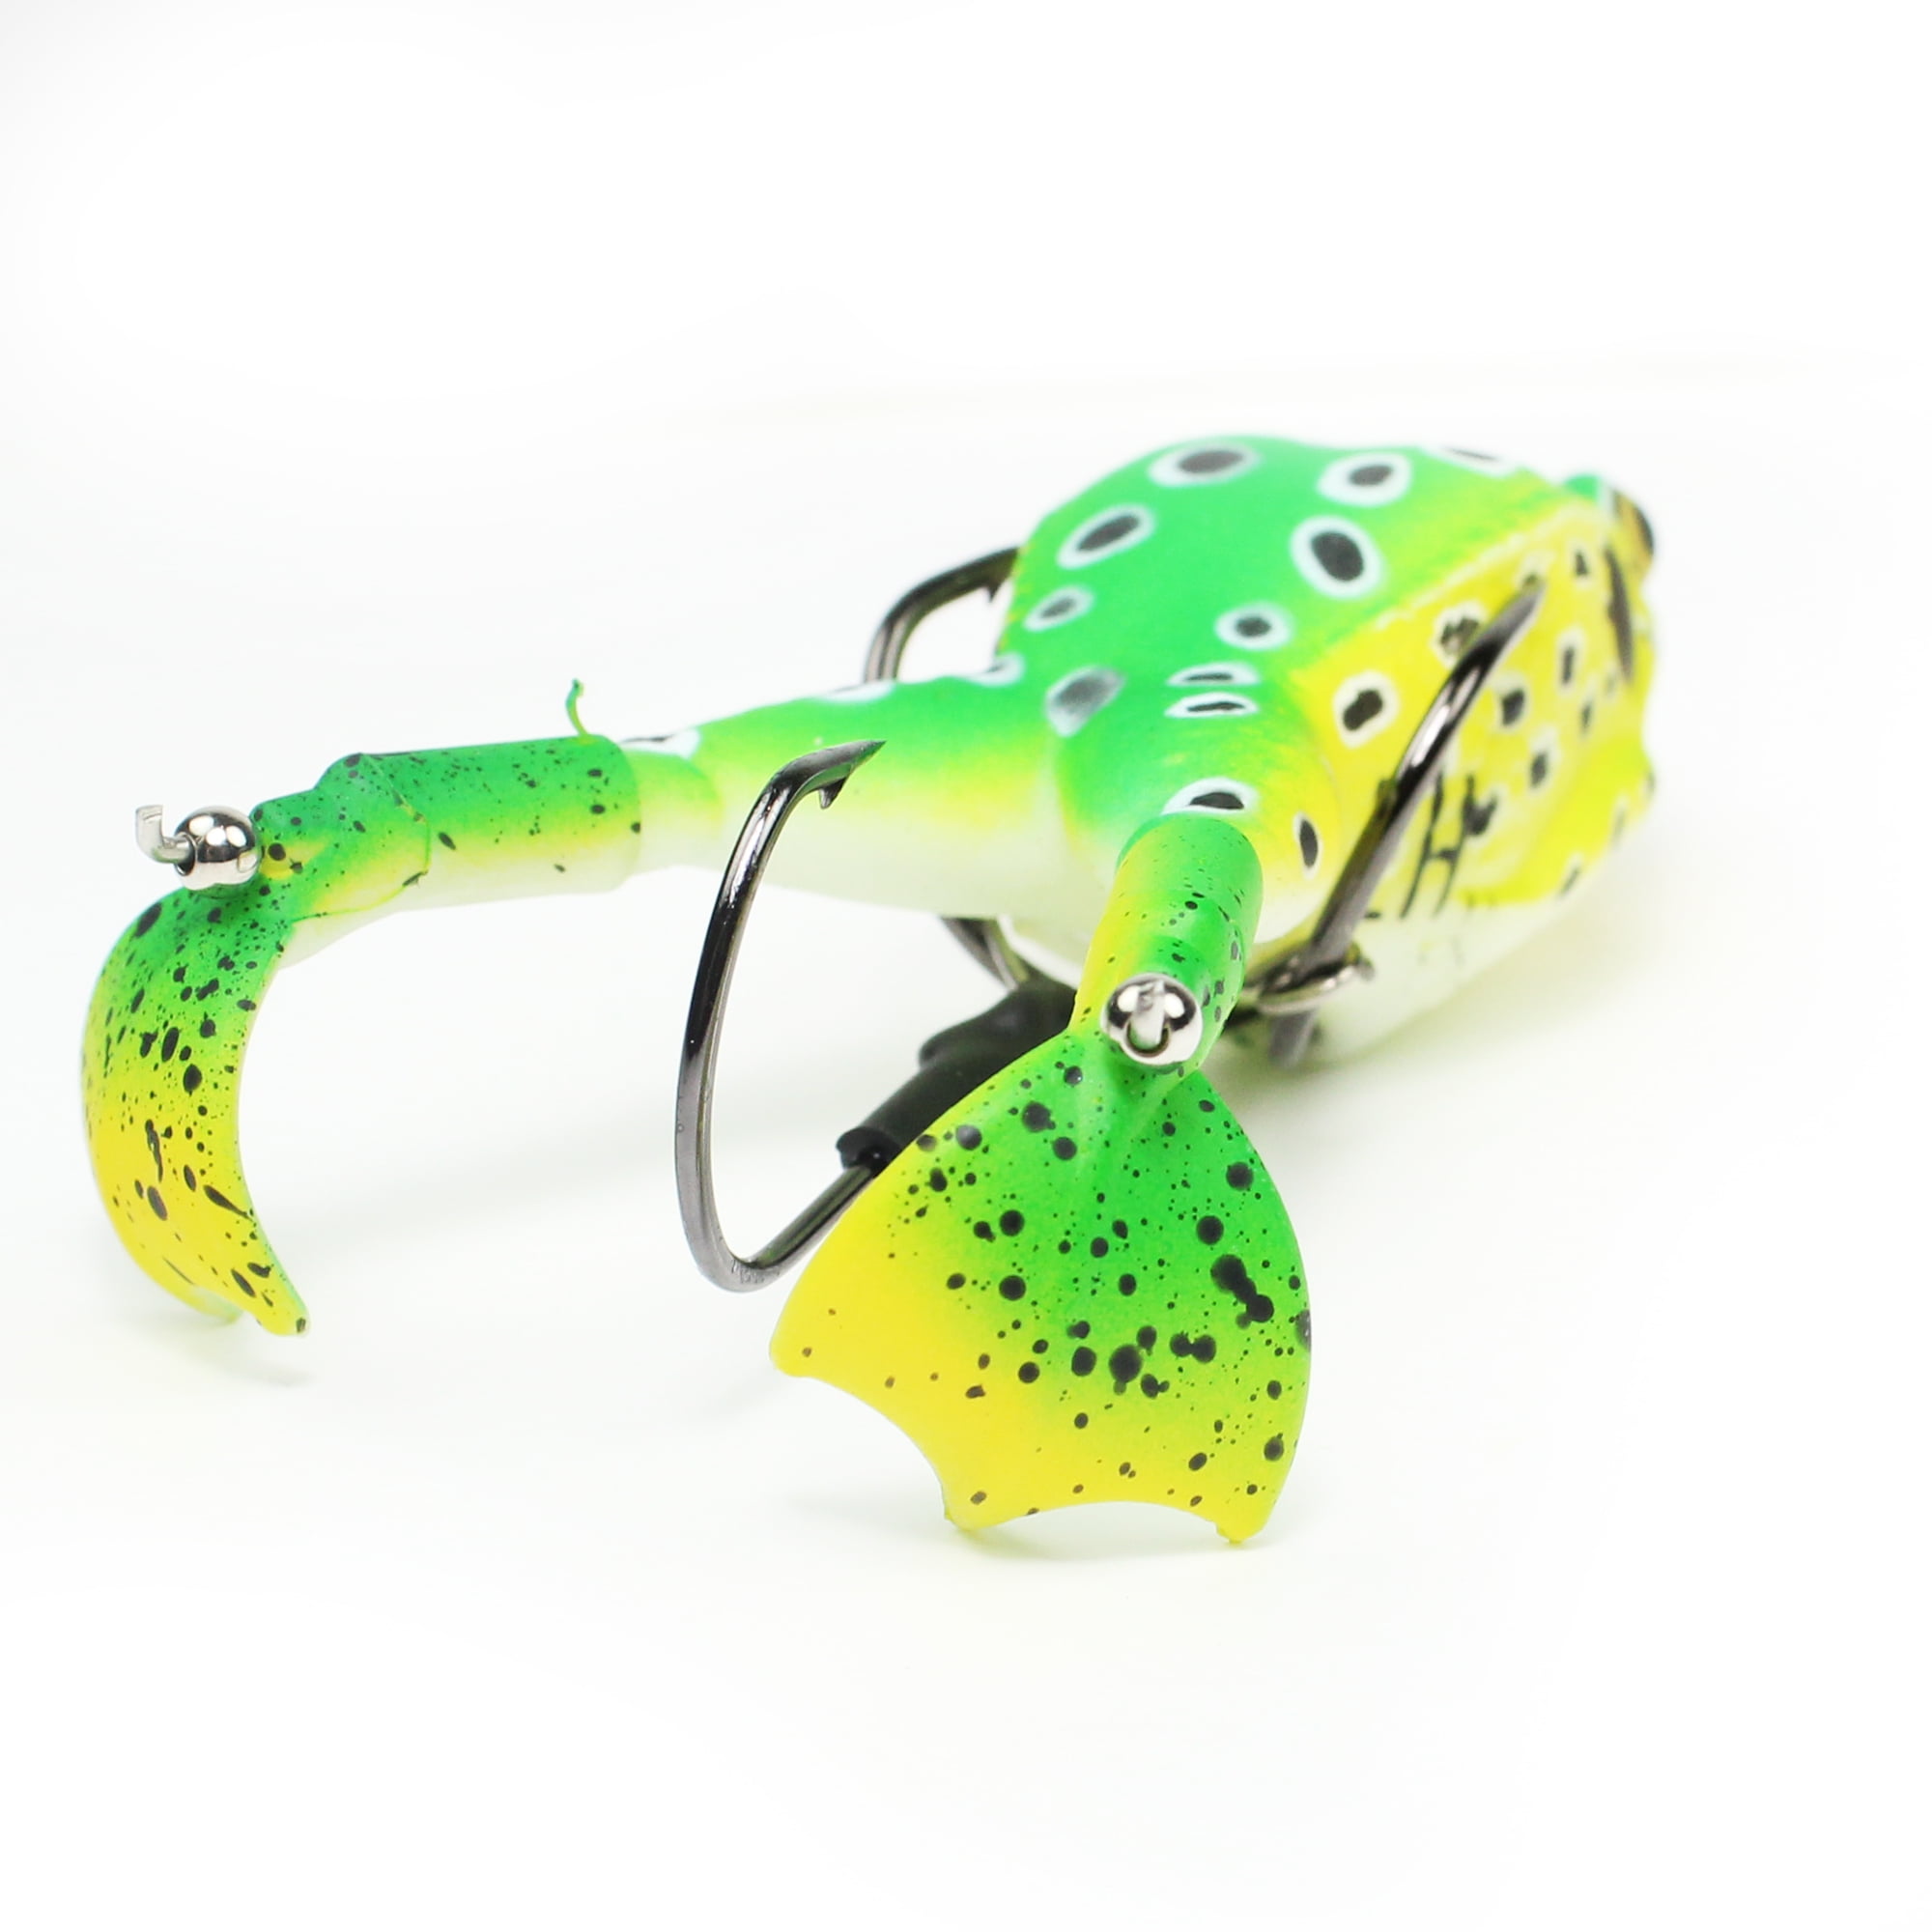 Lunkerhunt Prop Frog - Topwater Lure - Leopard,3.5in,1/2oz,Soft Baits, Fishing Lures 